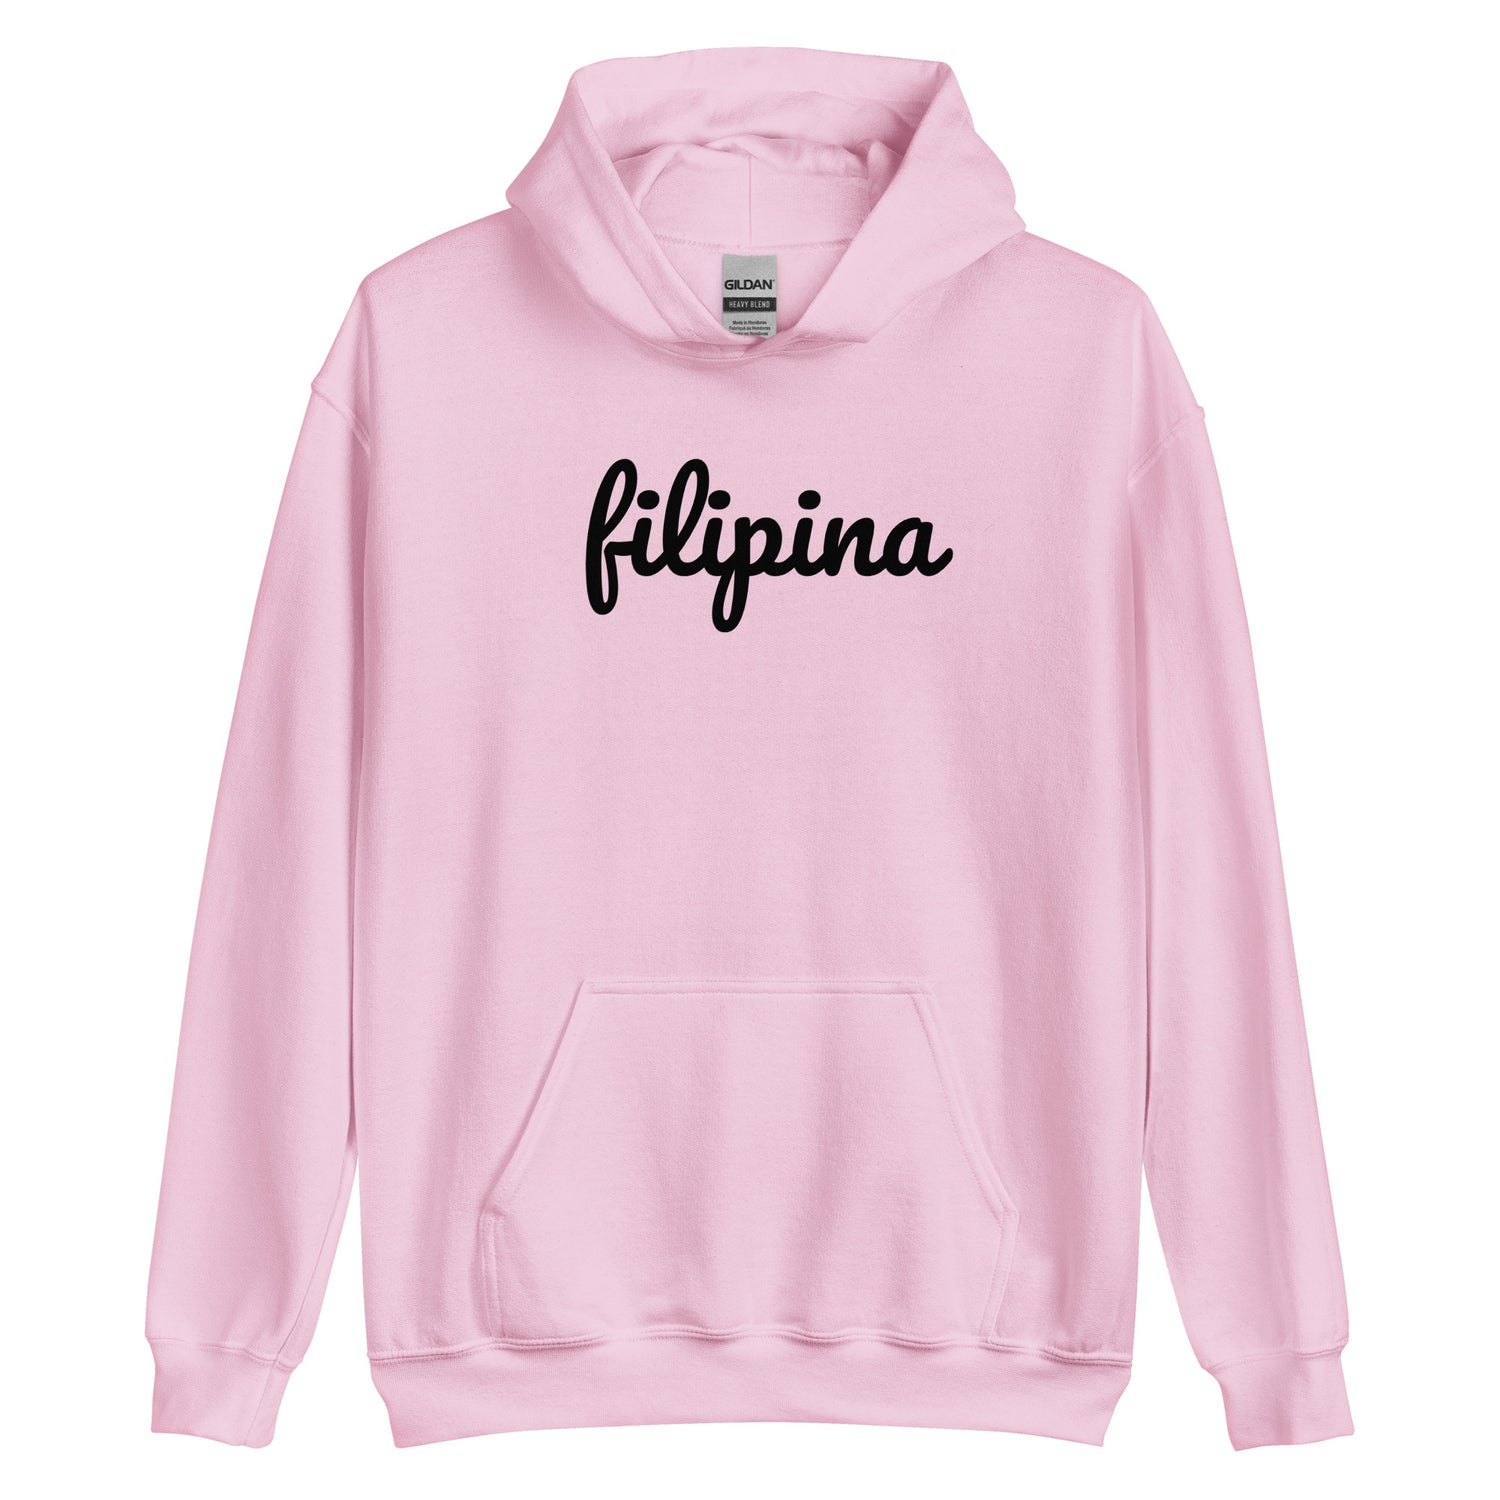 Filipina Statement Hoodie in color variant Light Pink.